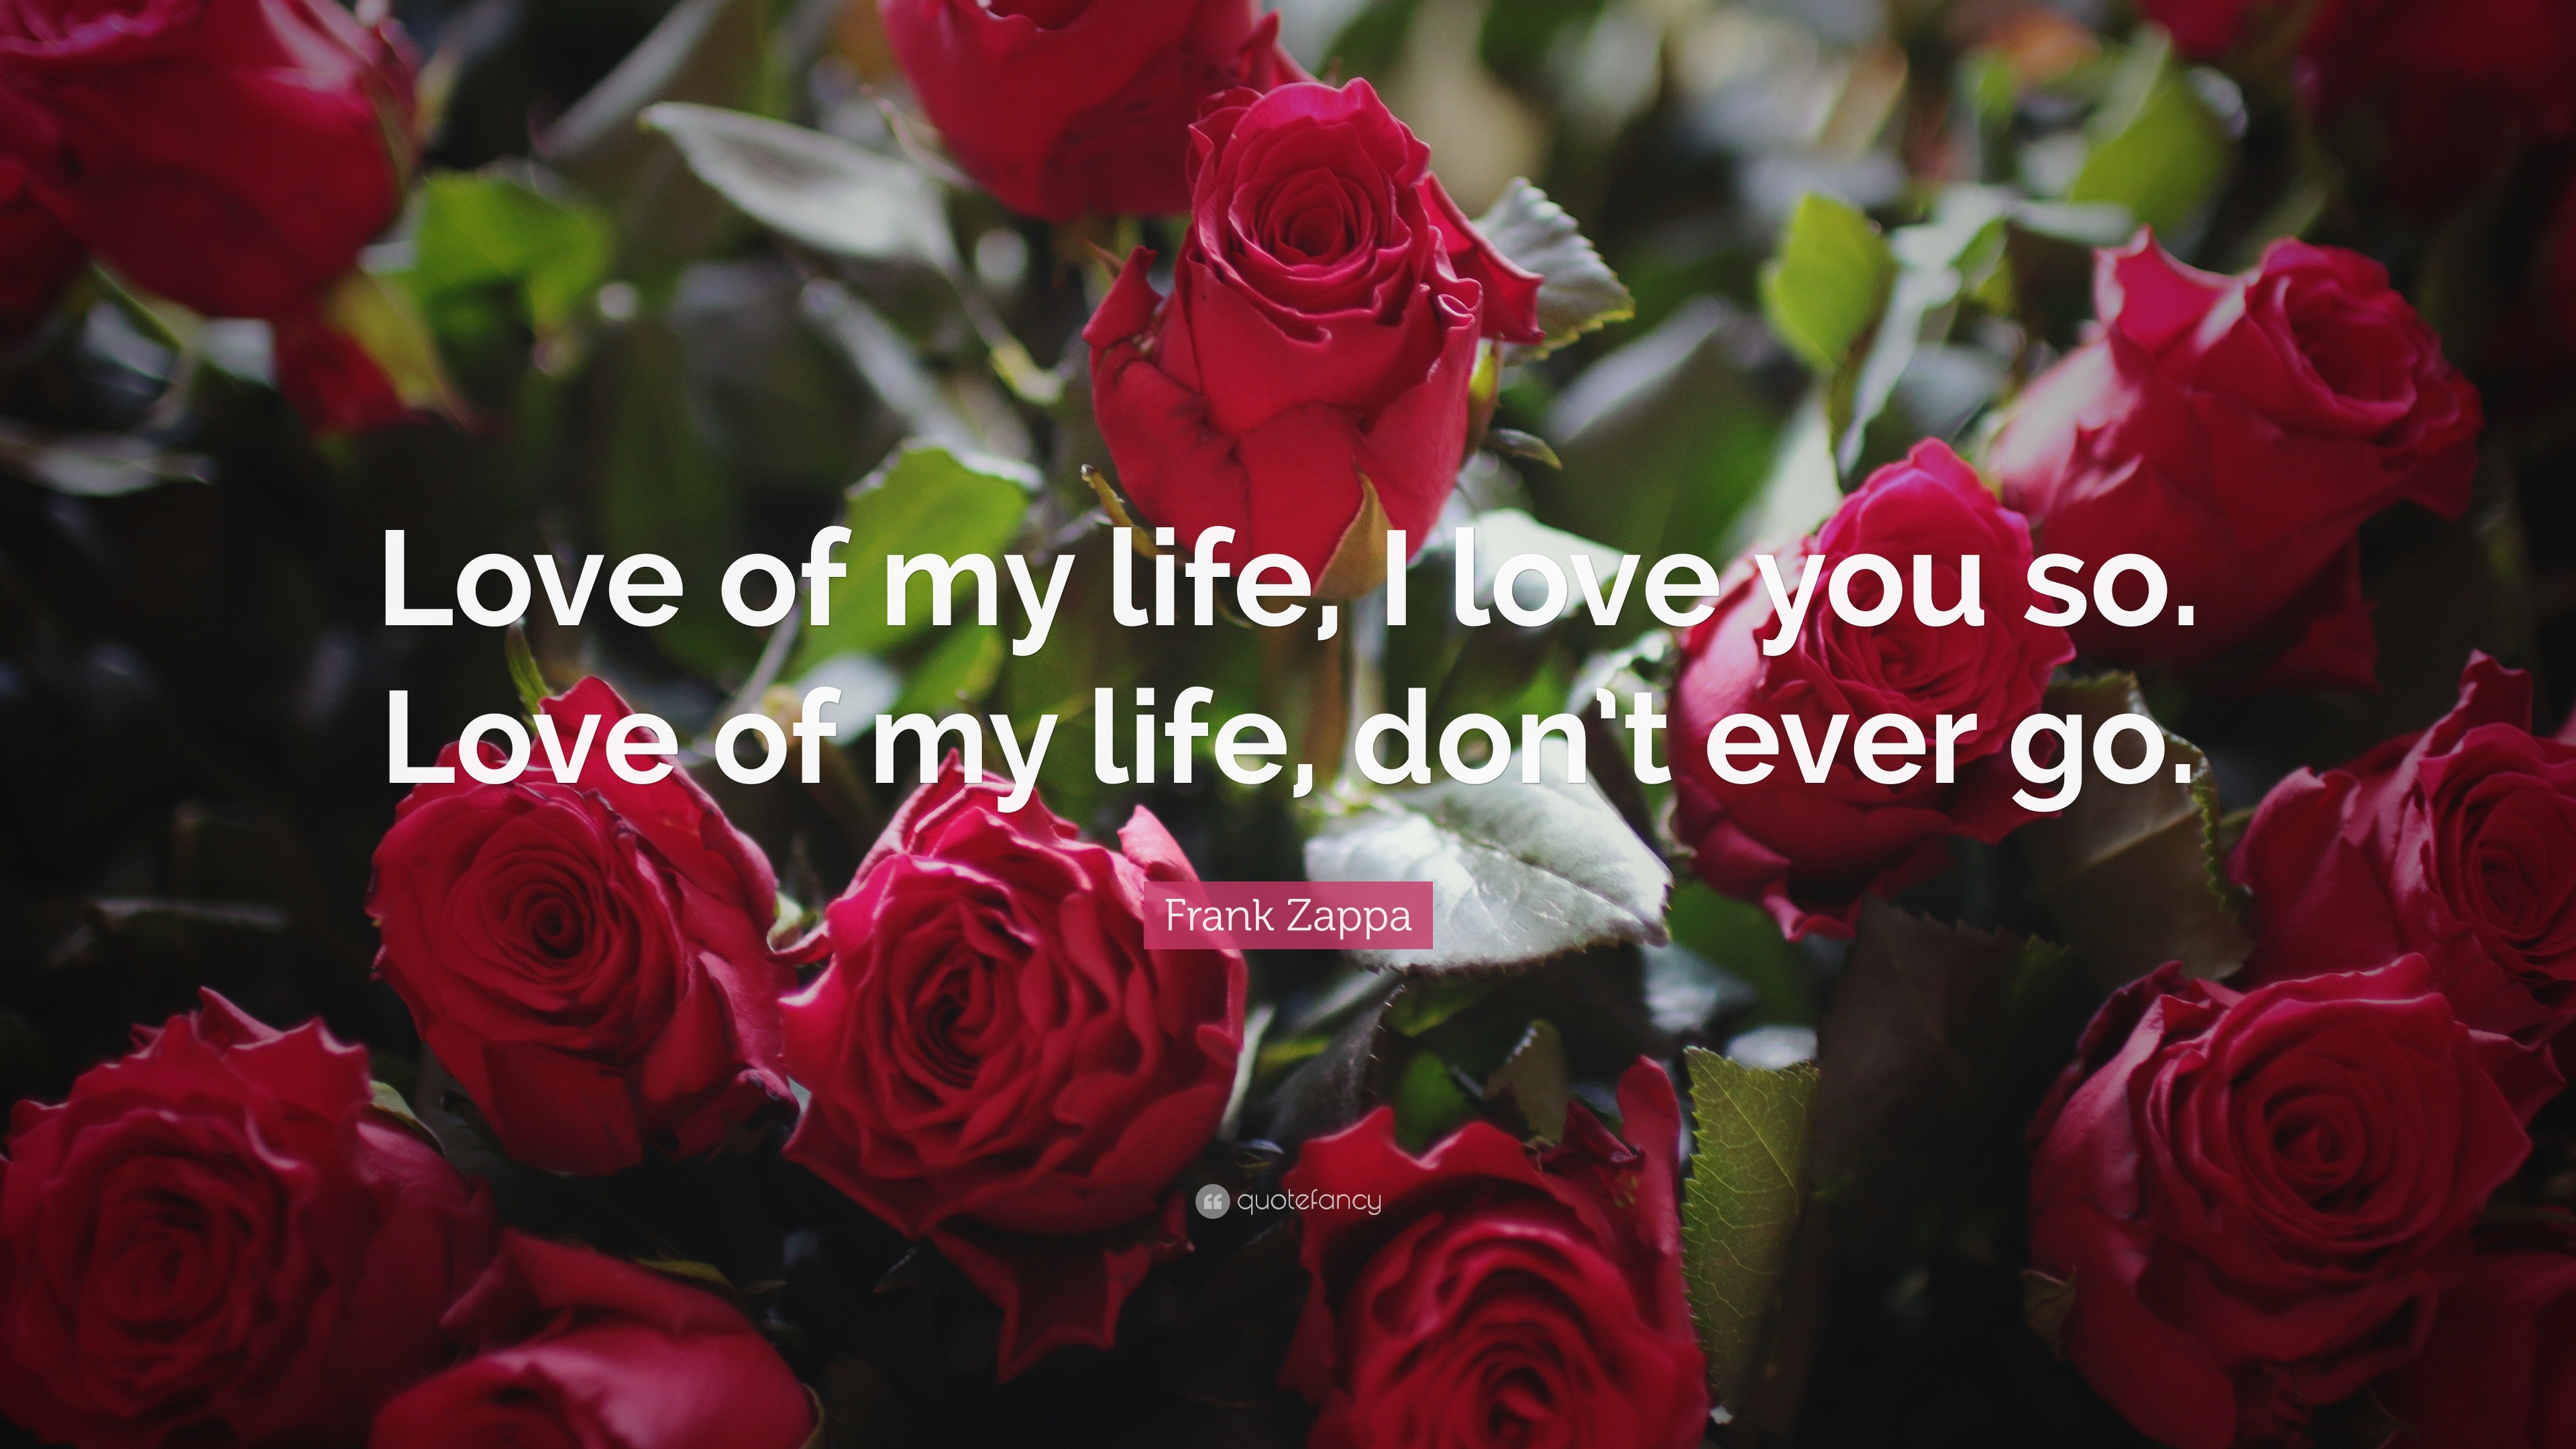 Romantic Quotes “Love of my life I love you so Love of